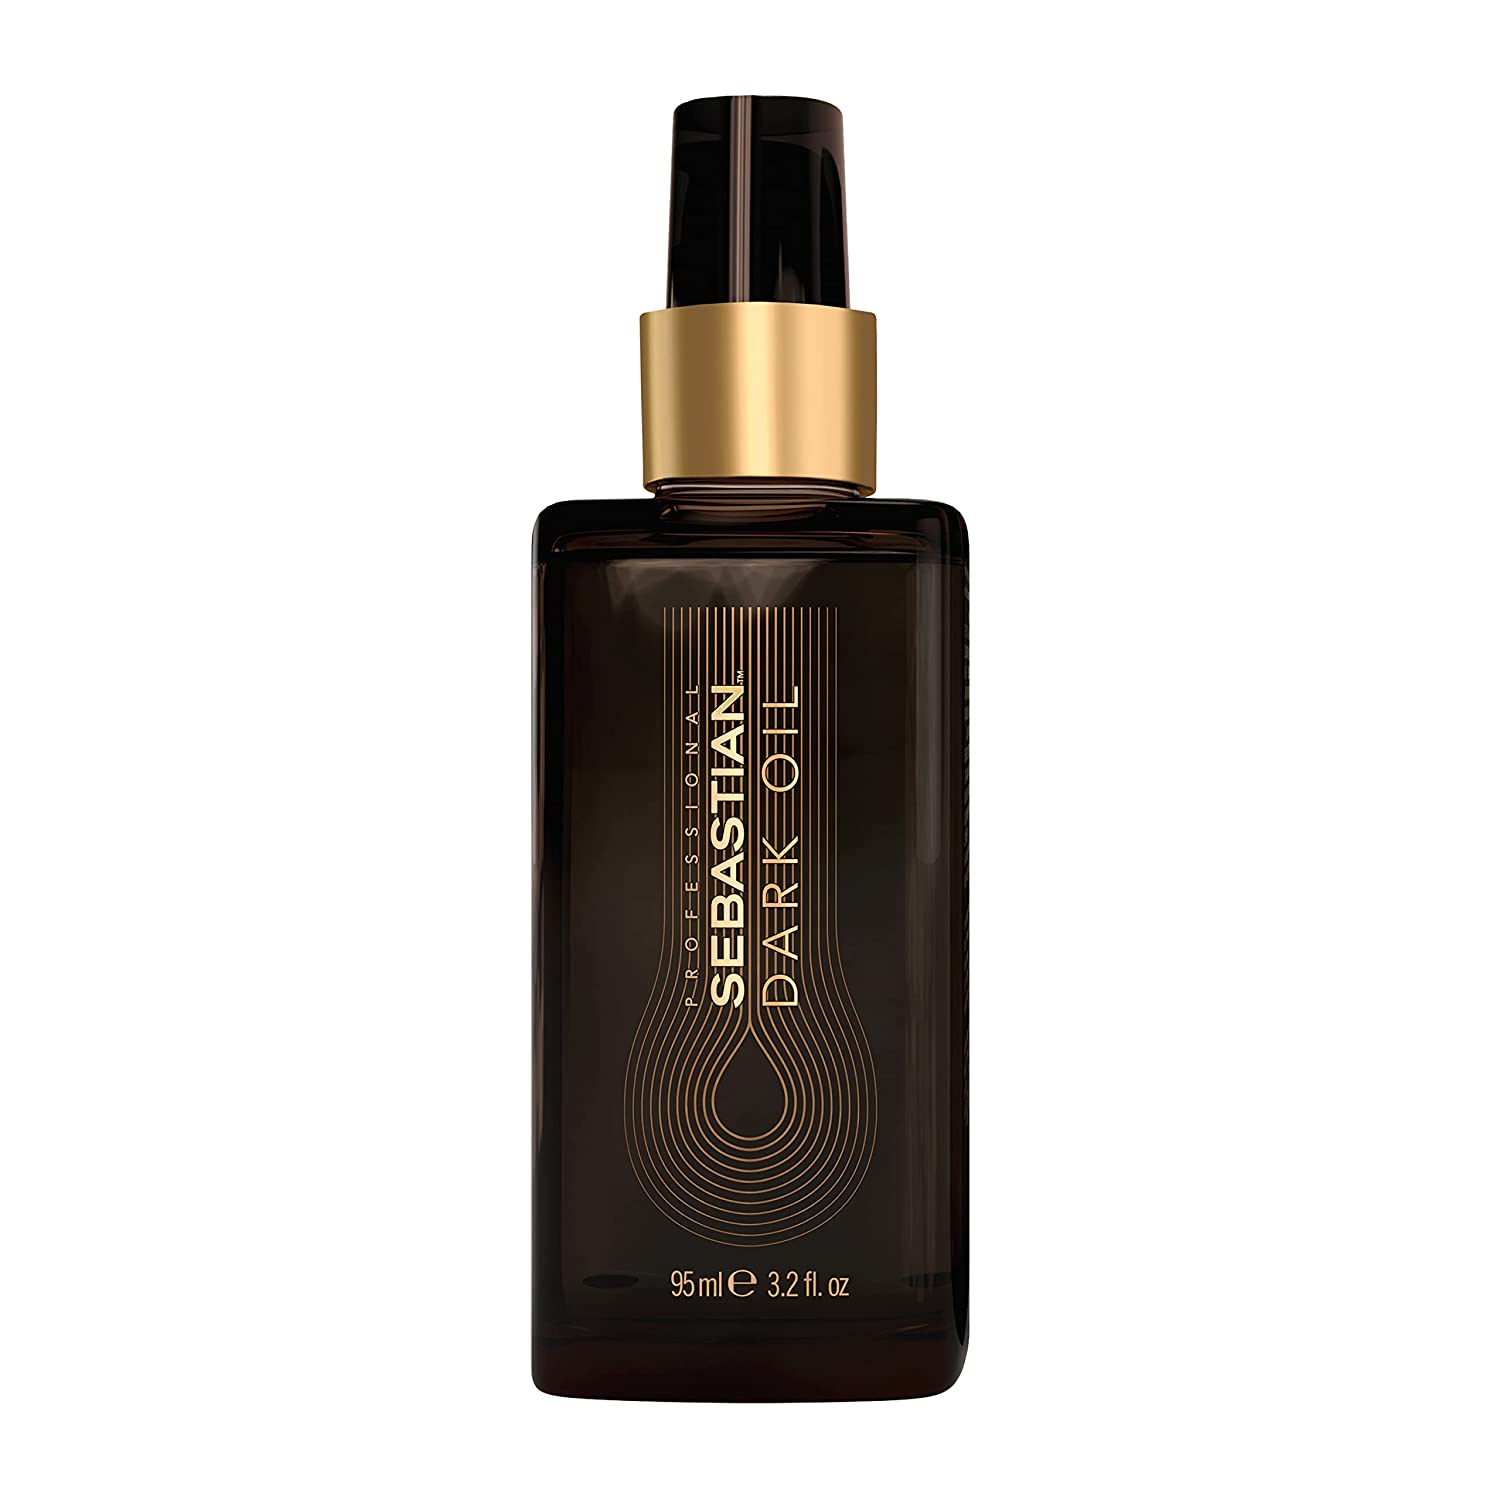 Sebastian Professional Dark Oil Hair Styling Oil, Up to 48 Hours Softness, Weightless, For All Hair Types, 95 ml, colour ‎no